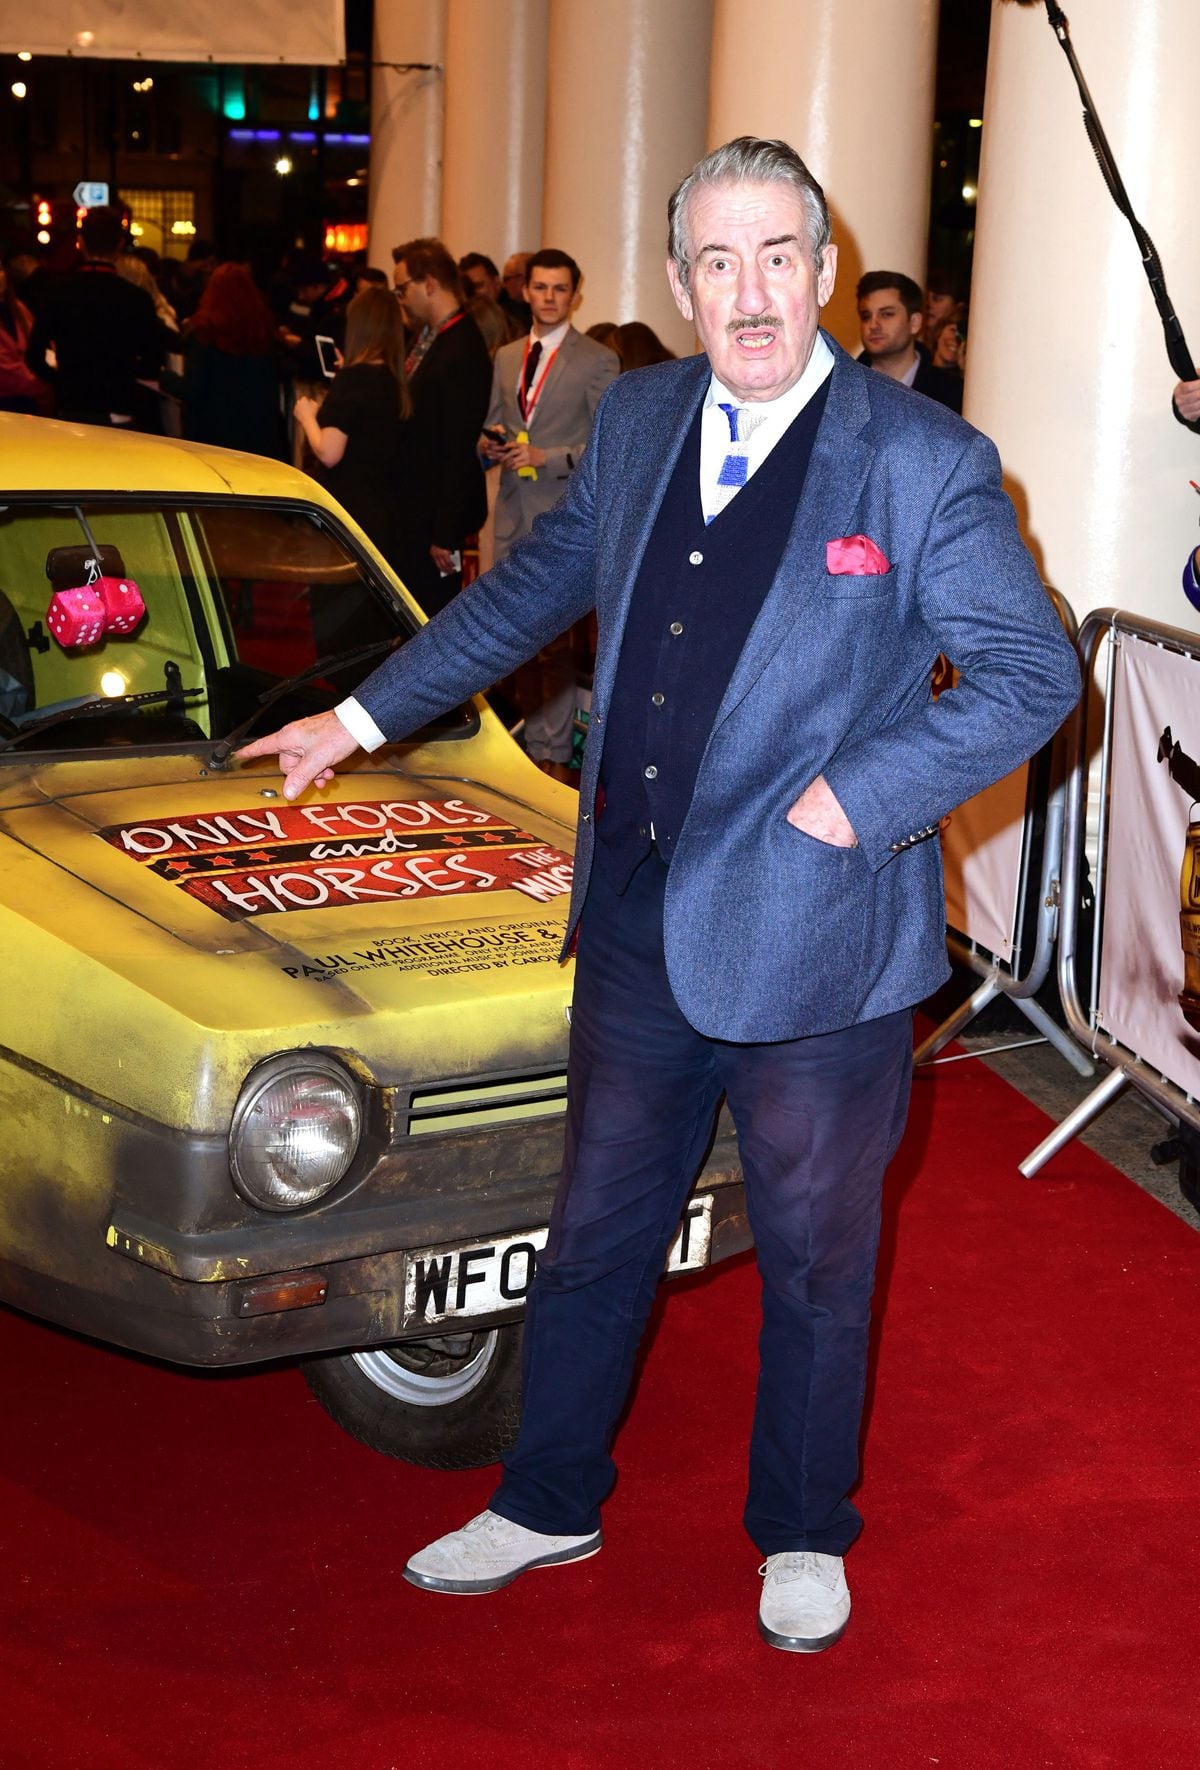 Undated Handout Photo of John Challis at the opening of the Only Fools and Horses The Musical show in London in 2019.  See PA Feature WELLBEING John Challis. Picture credit should read: Ian West/PA. WARNING: This picture must only be used to accompany PA Feature. WELLBEING John Challis.